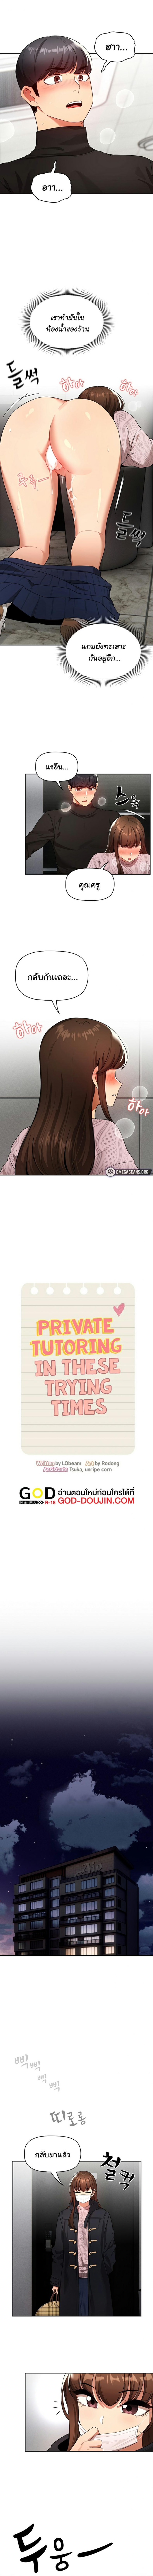 Private Tutoring in These Trying Times 86 ภาพที่ 7